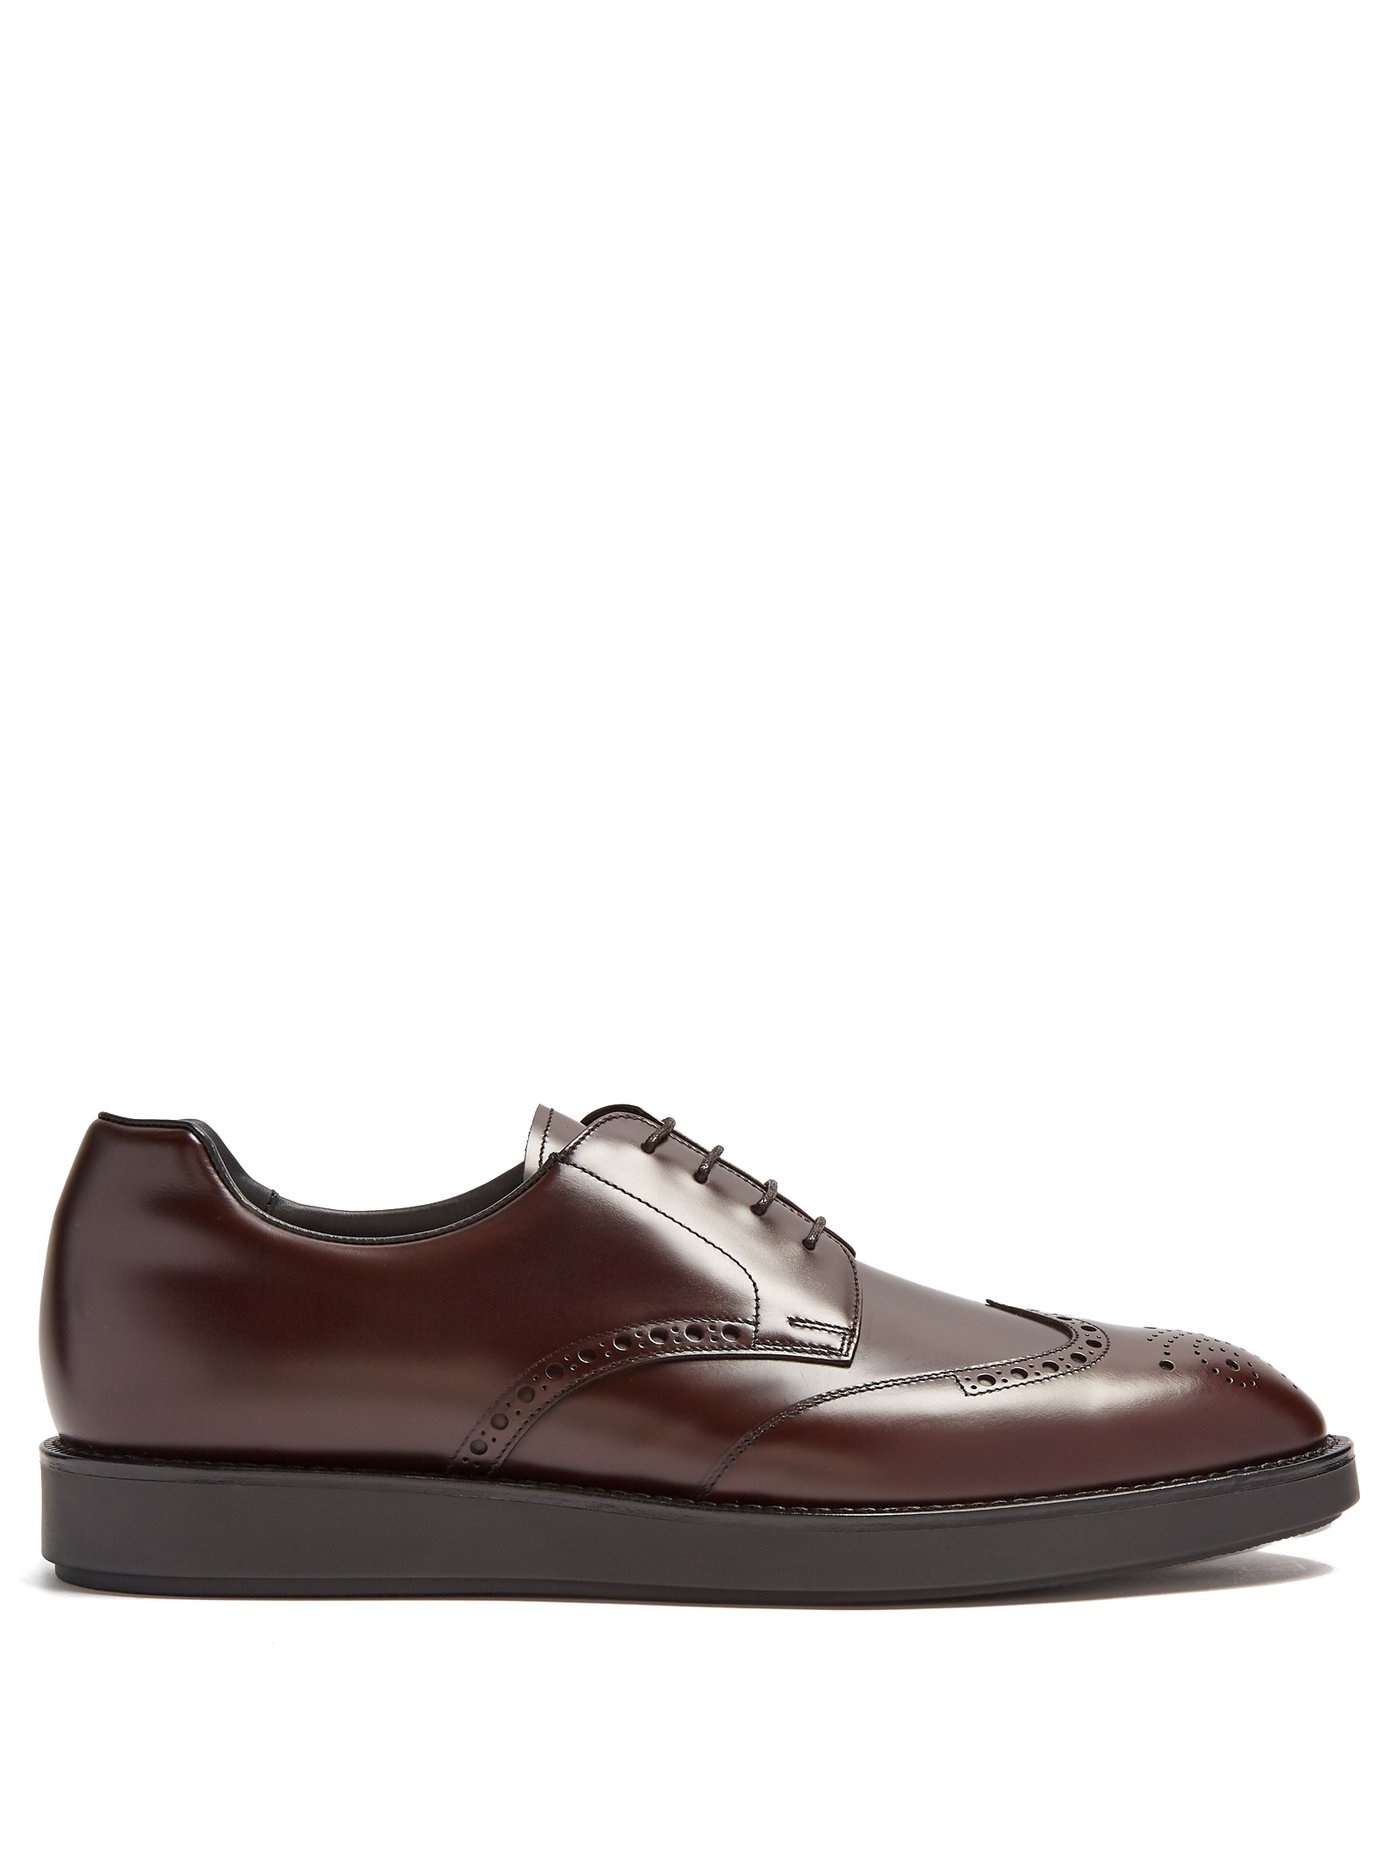 leather soled brogues